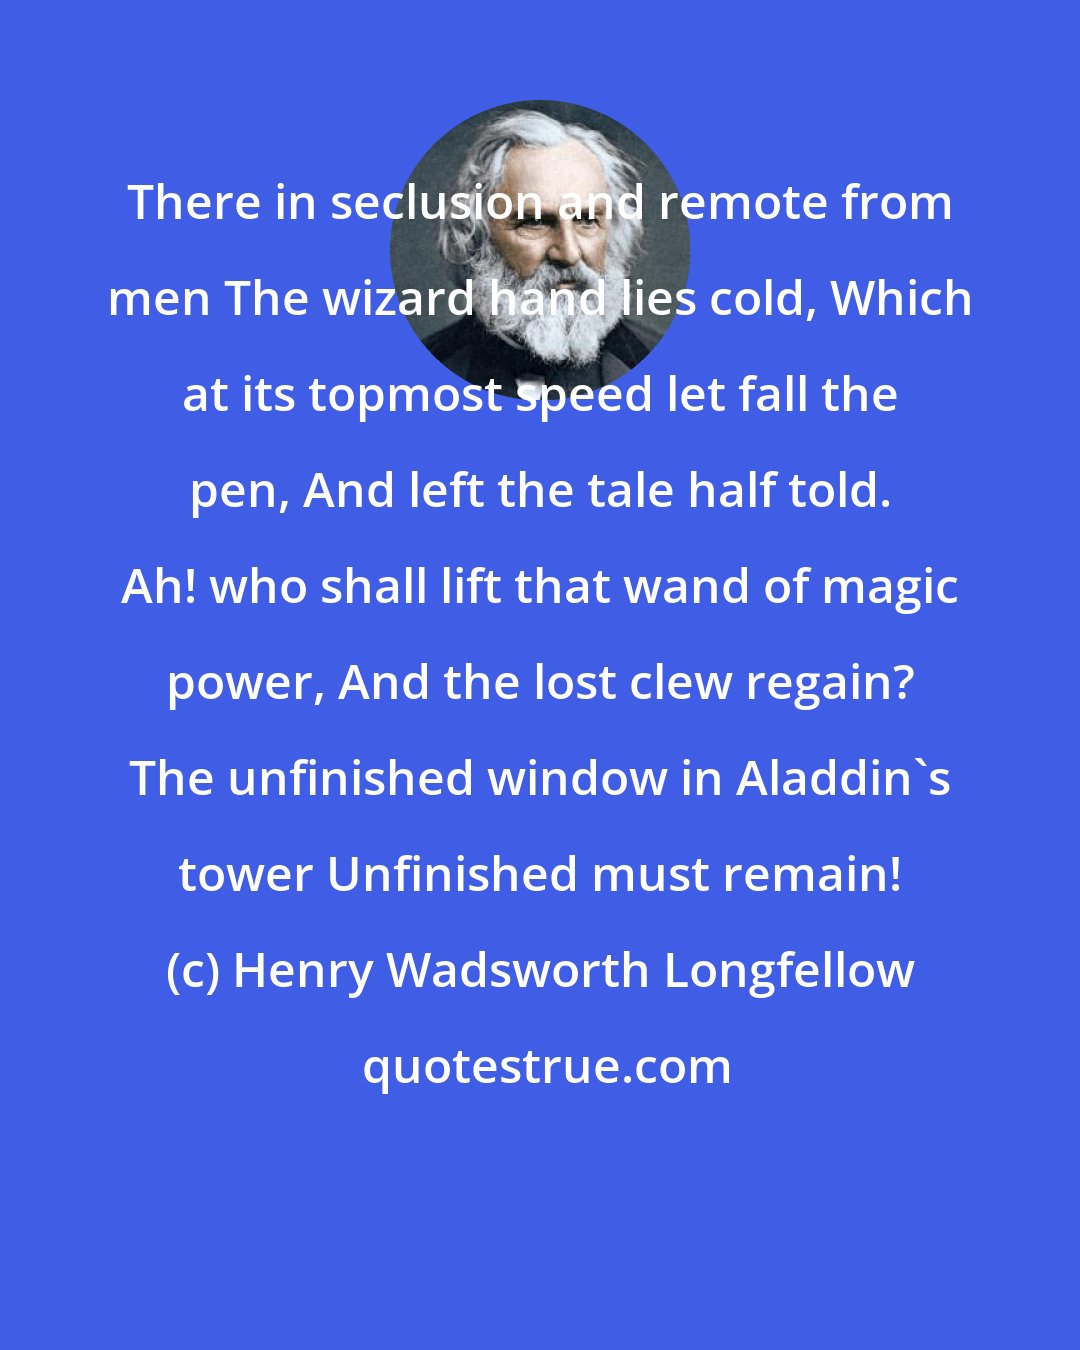 Henry Wadsworth Longfellow: There in seclusion and remote from men The wizard hand lies cold, Which at its topmost speed let fall the pen, And left the tale half told. Ah! who shall lift that wand of magic power, And the lost clew regain? The unfinished window in Aladdin's tower Unfinished must remain!